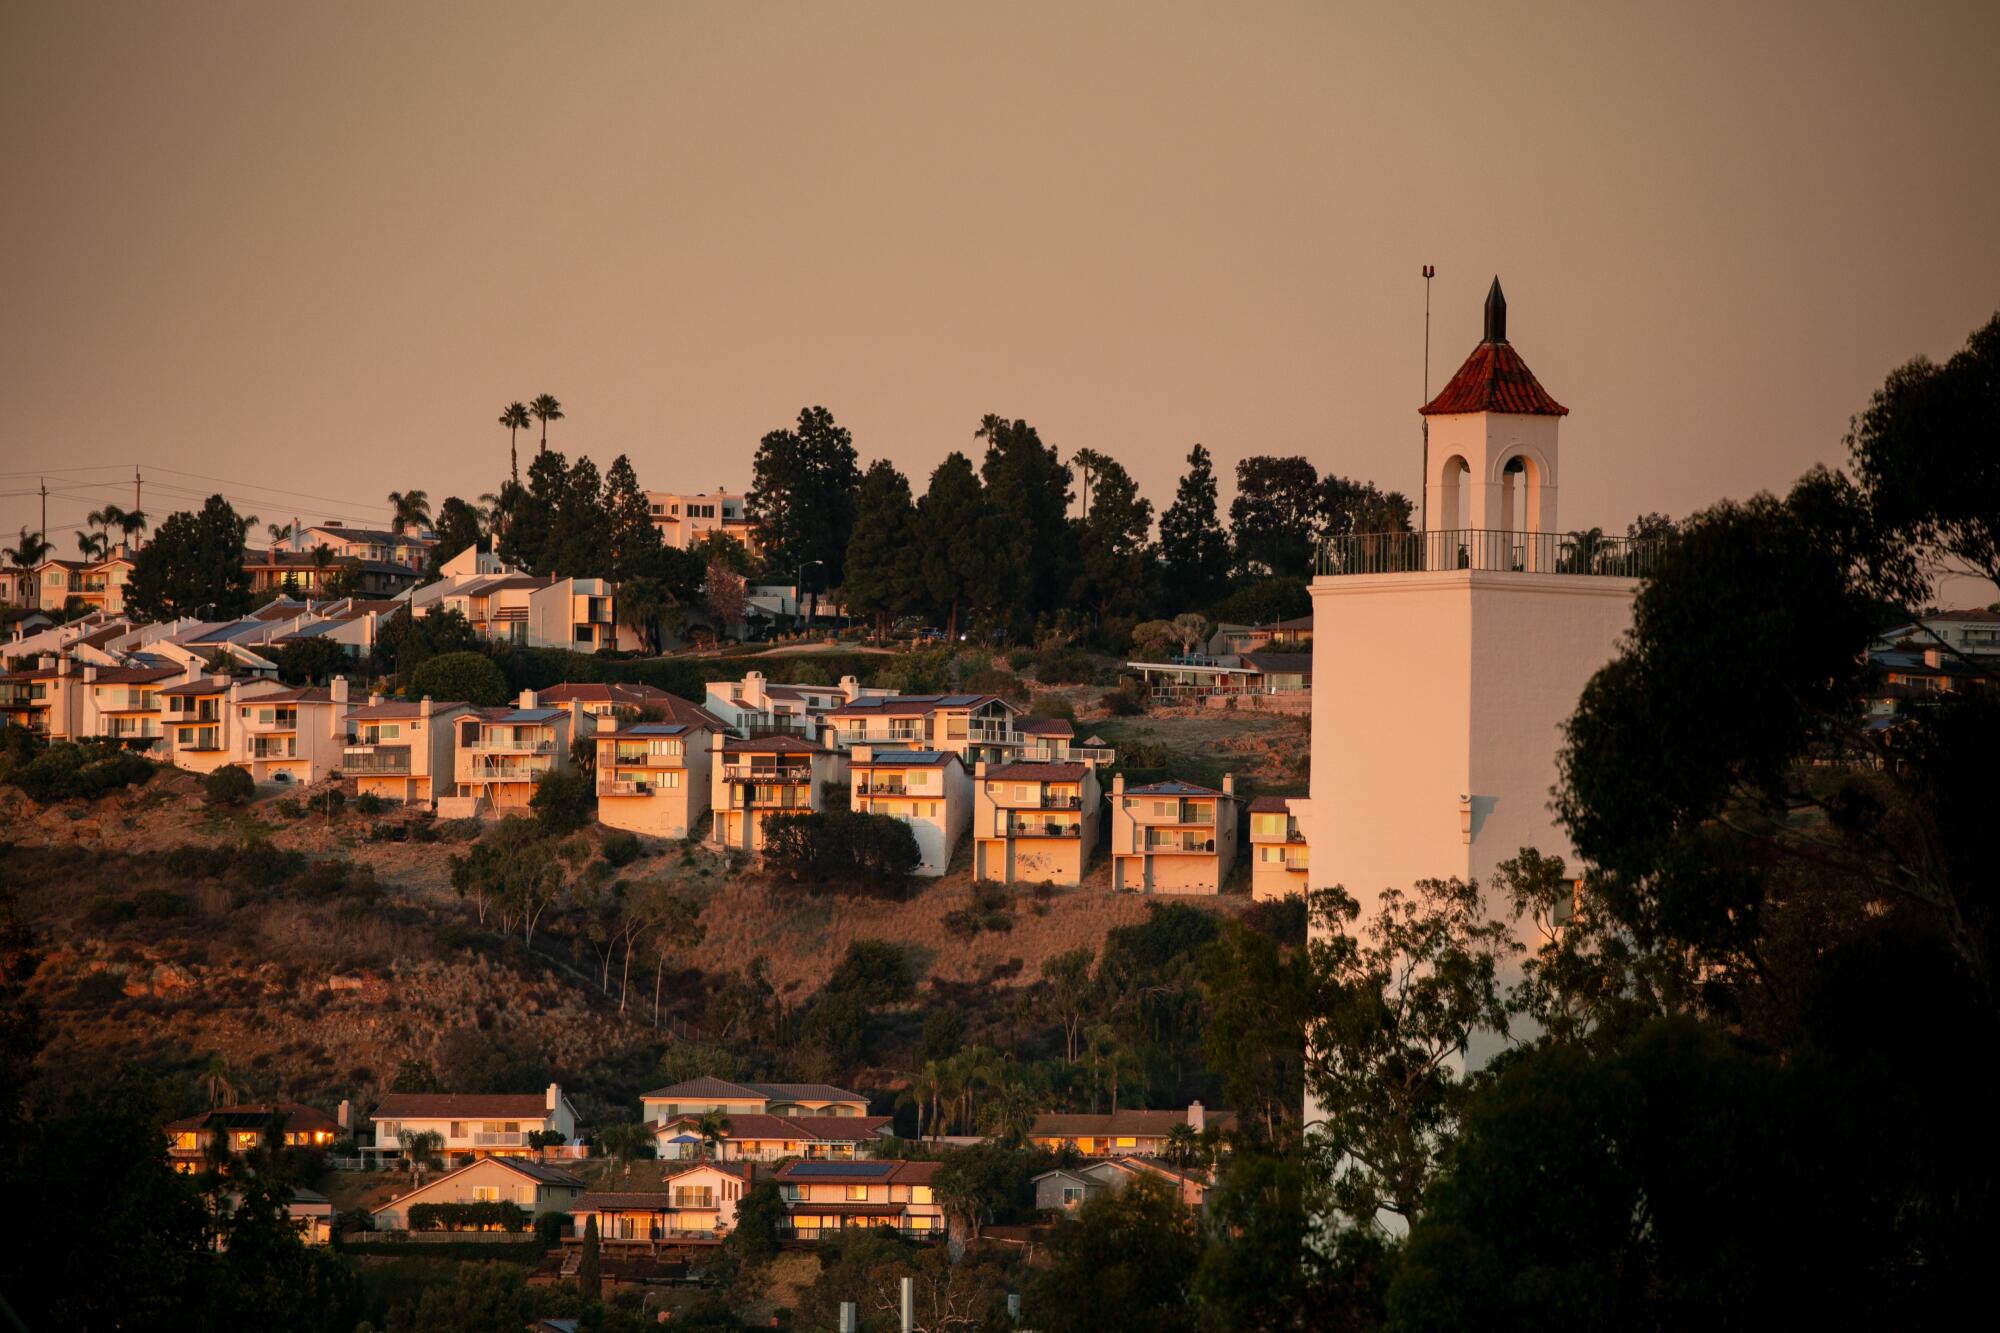 The Del Cerro neighborhood is visible across the San Diego State University campus.